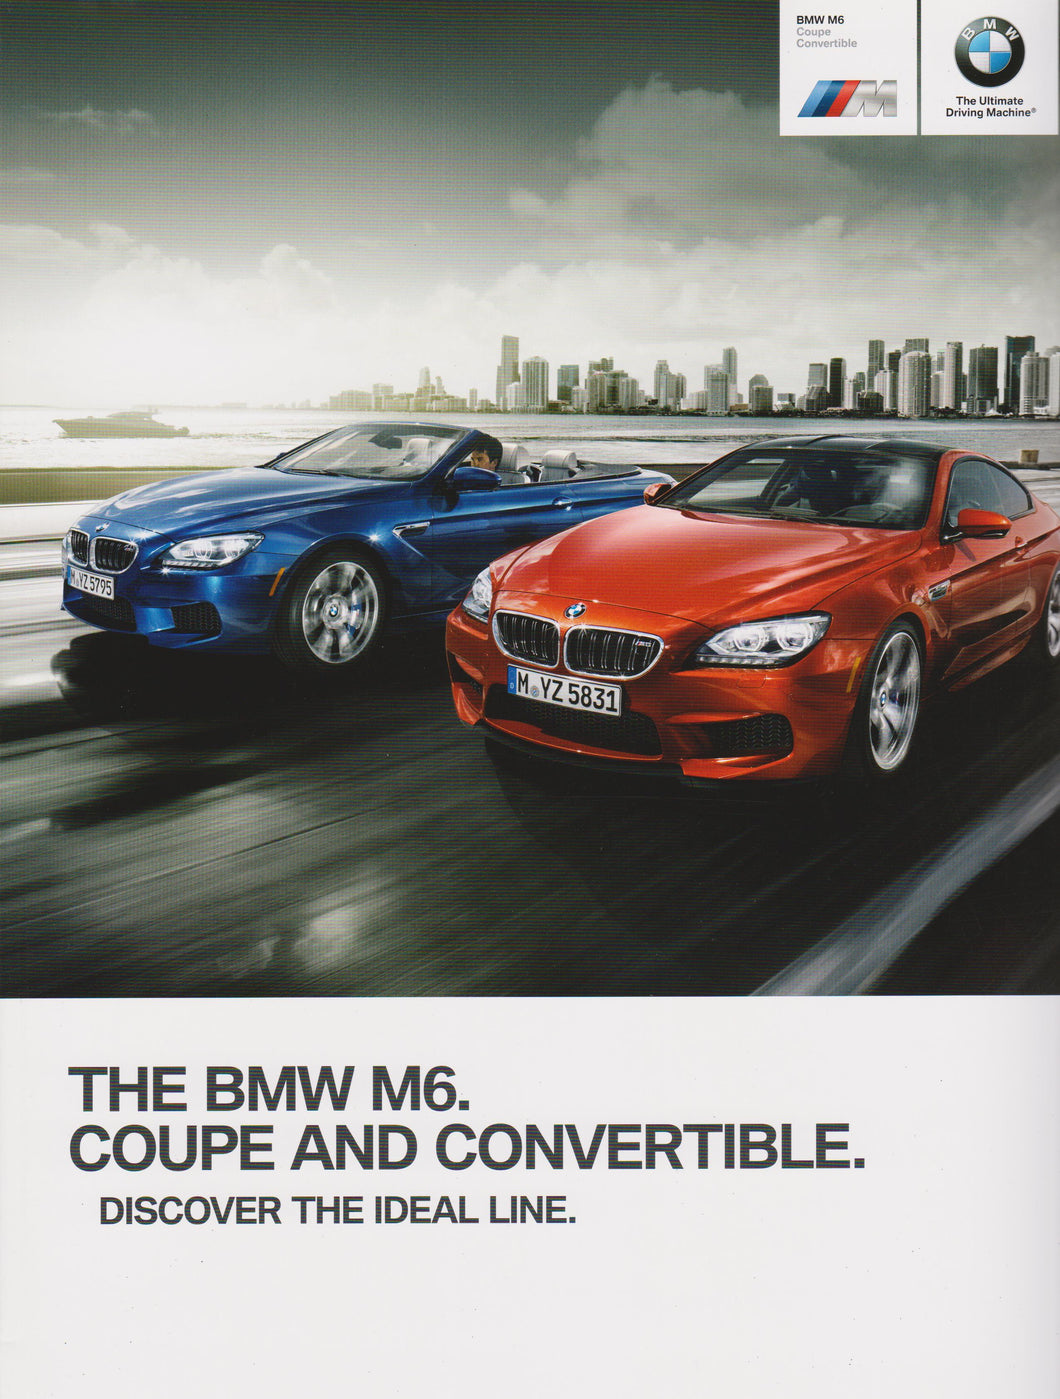 Brochure - BMW M6 Coupe and Convertible  Discover the ideal line (2014 F12 / F13)